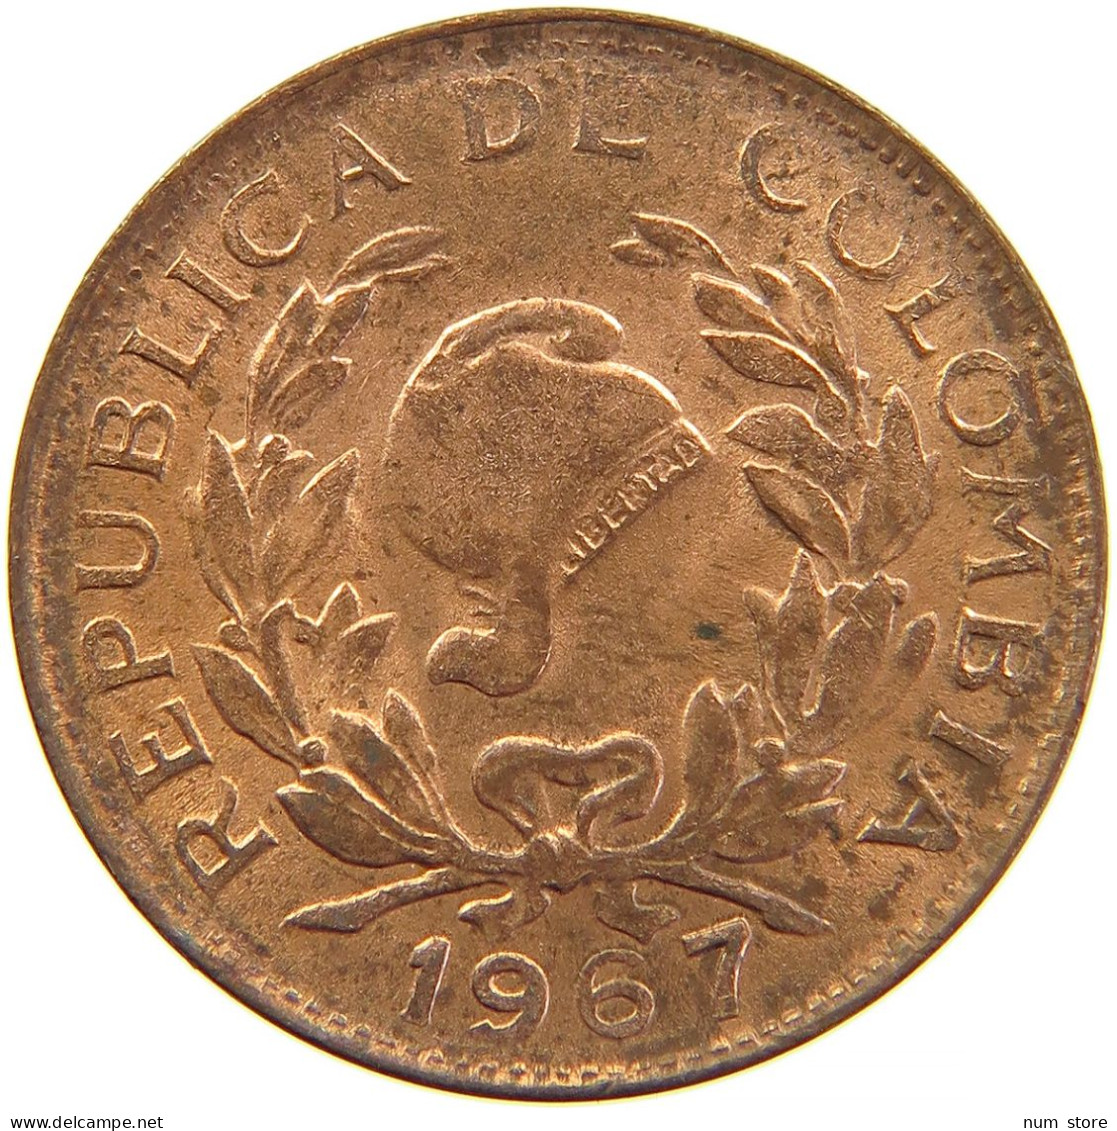 COLOMBIA 5 CENTAVOS 1967 #s083 0141 - Colombia